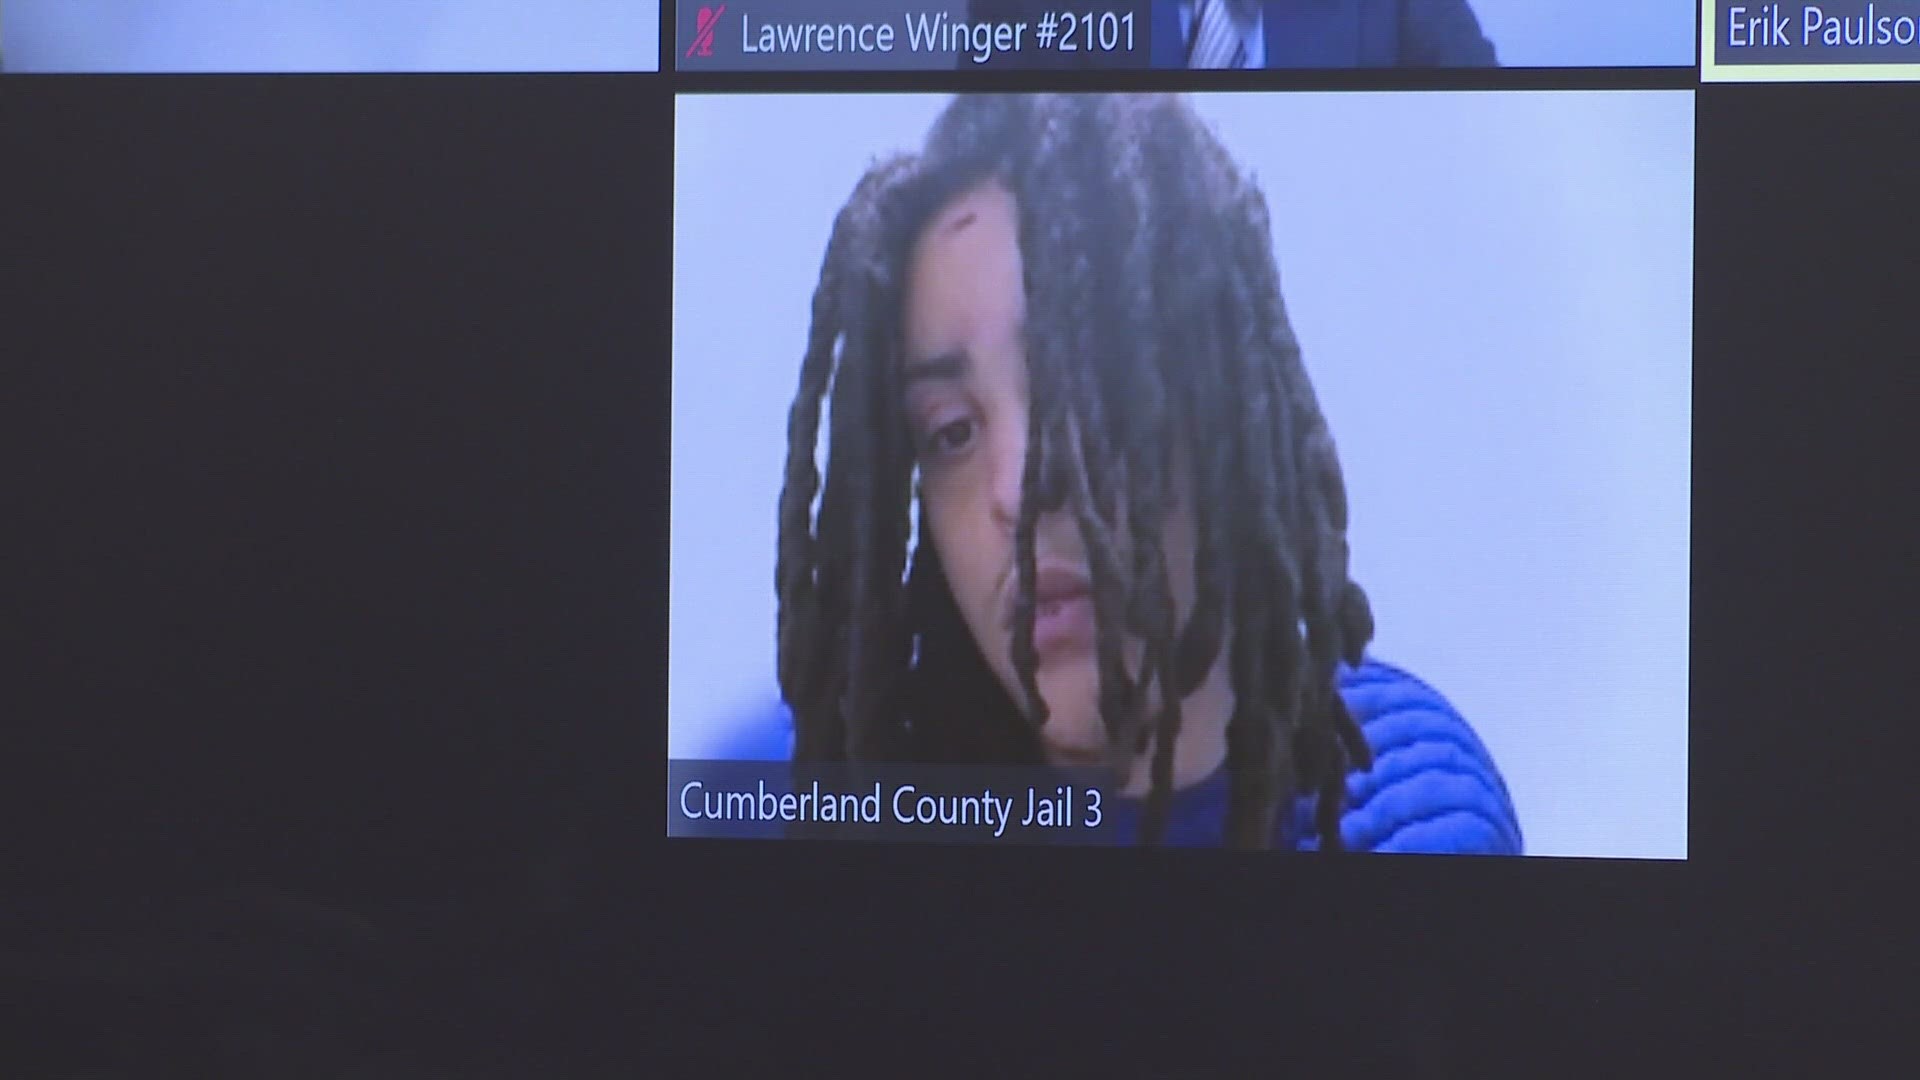 Marcel Lagrange Jr., 24, pleaded not guilty due to insanity in Cumberland County Court Thursday. He is accused of six counts, including two murder charges.